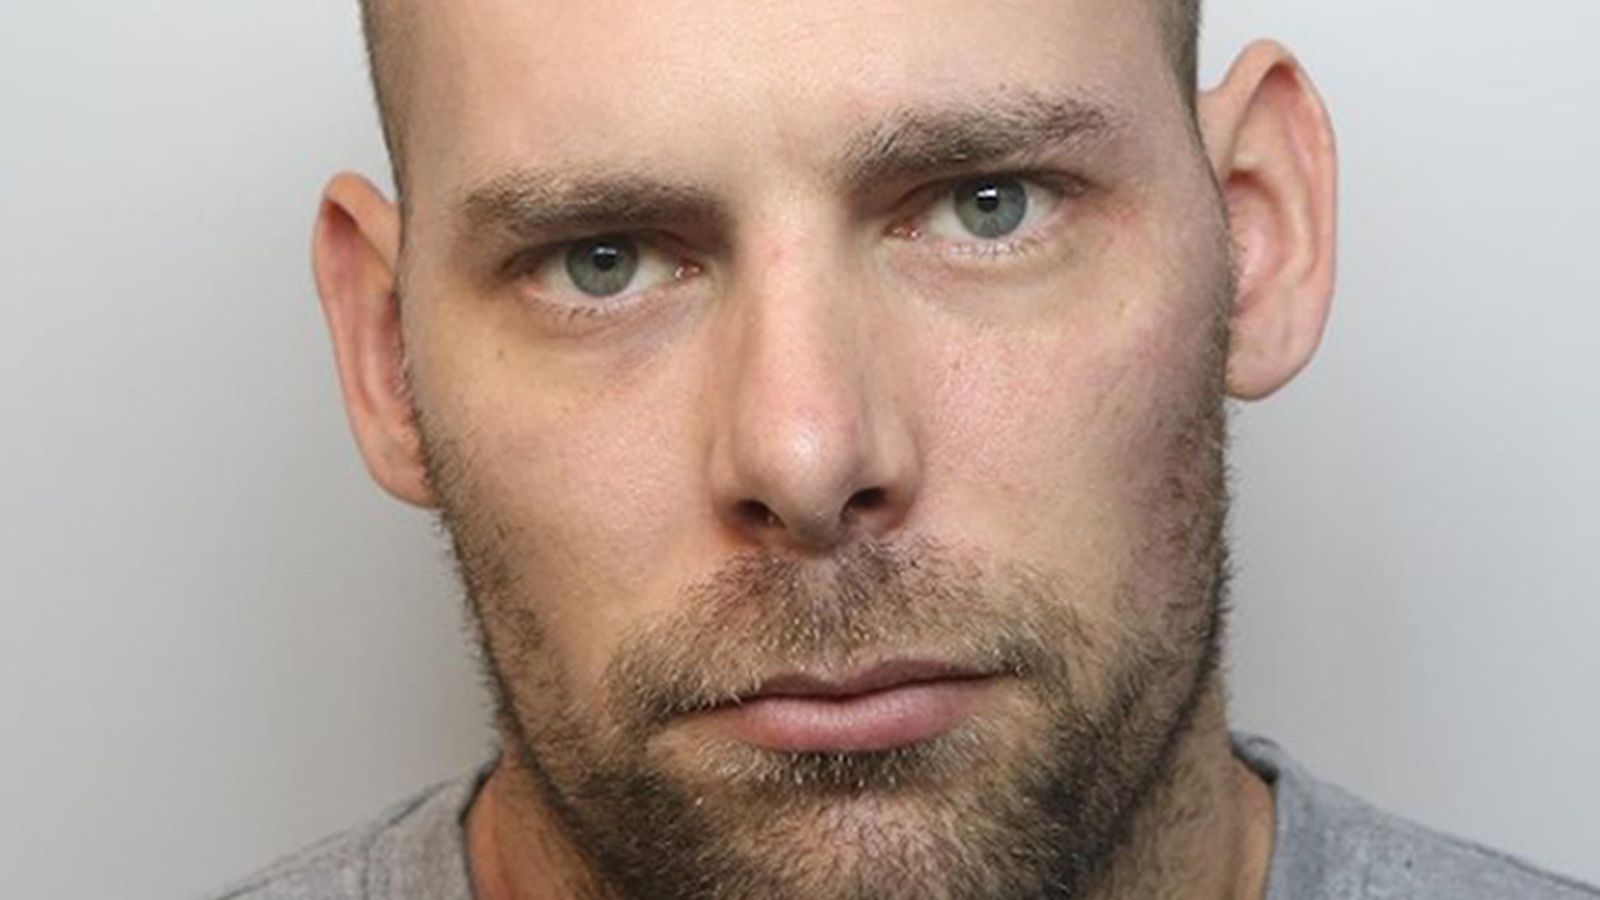 Killamarsh deaths: Damien Bendall who murdered pregnant woman and three children sentenced to whole life prison term